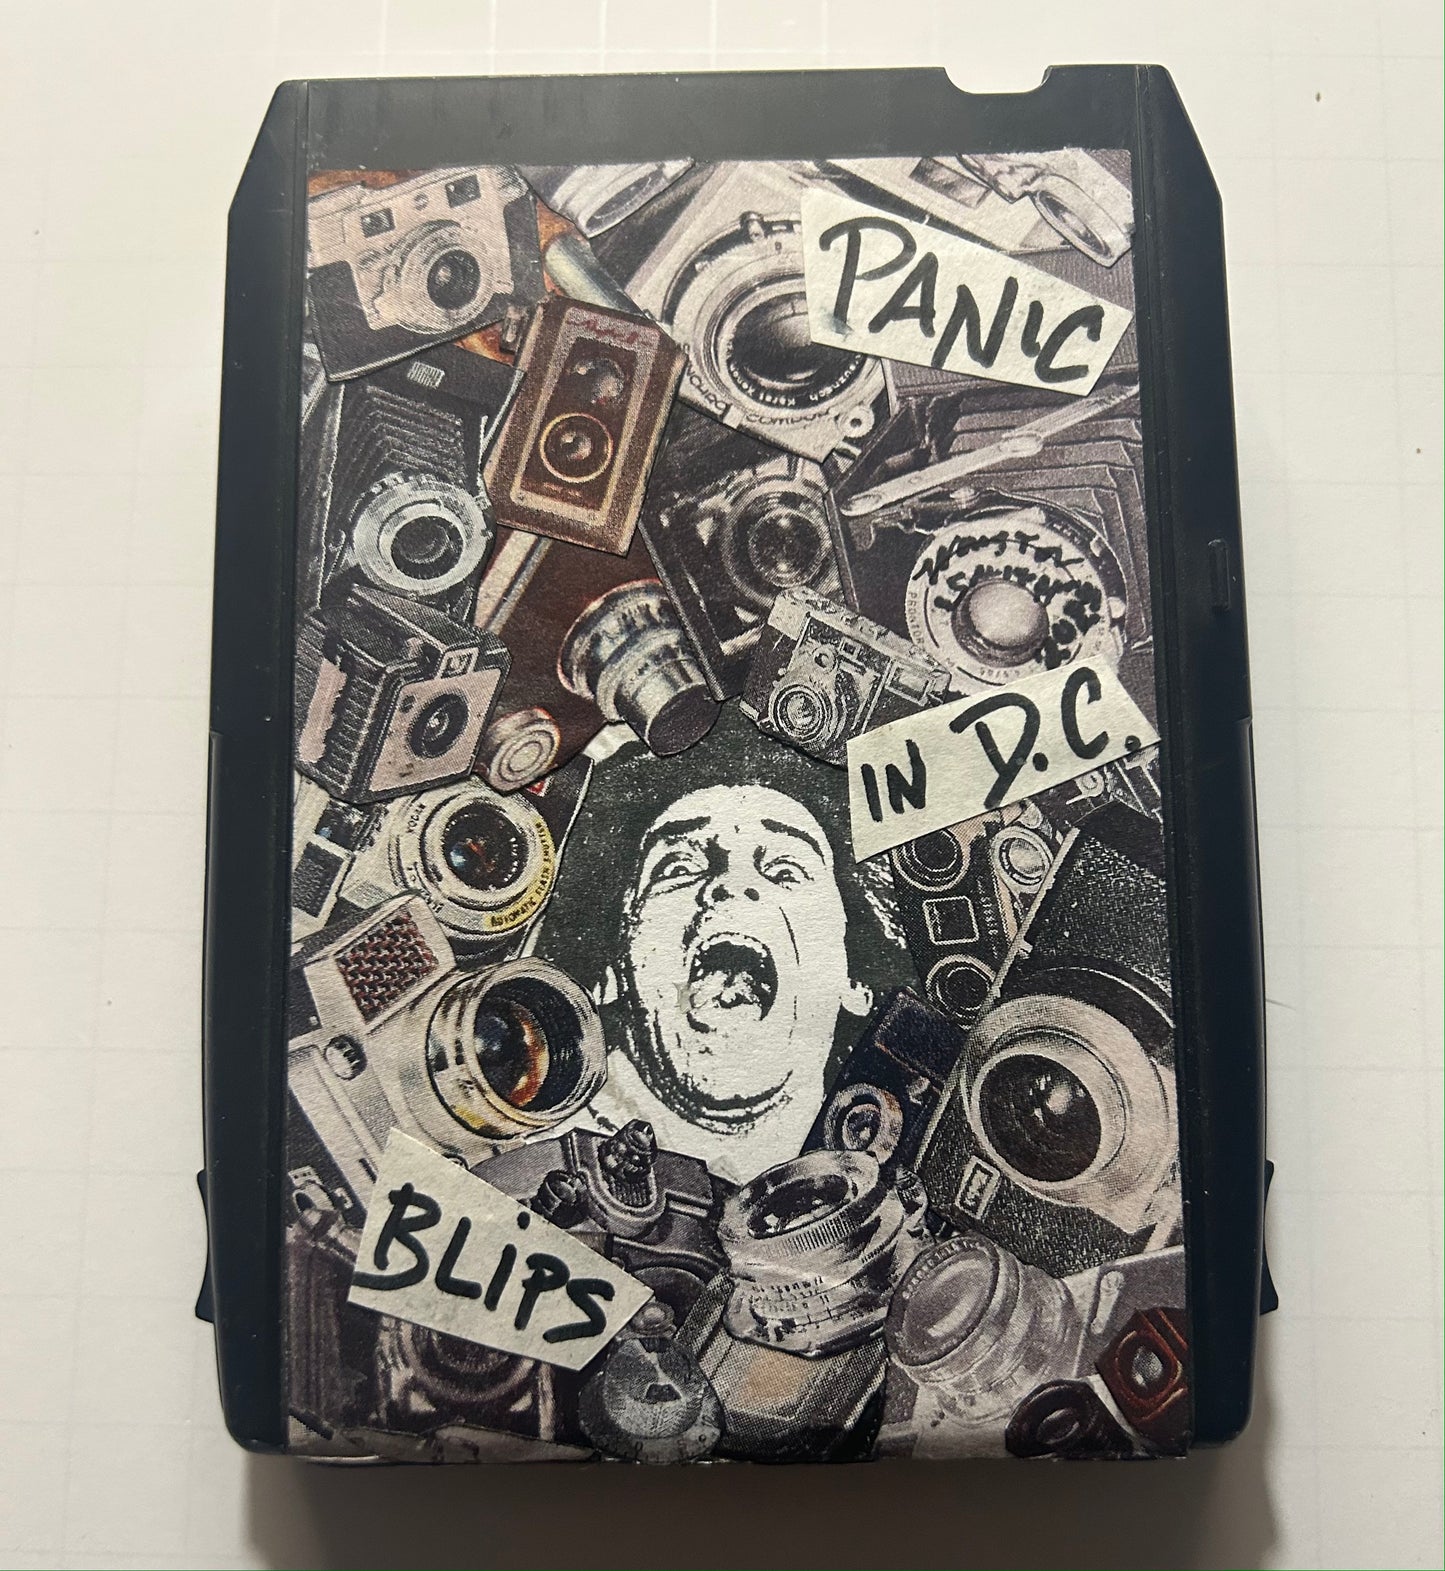 Winston Smith "The Blips - Panic in DC" 8-Track (2023)